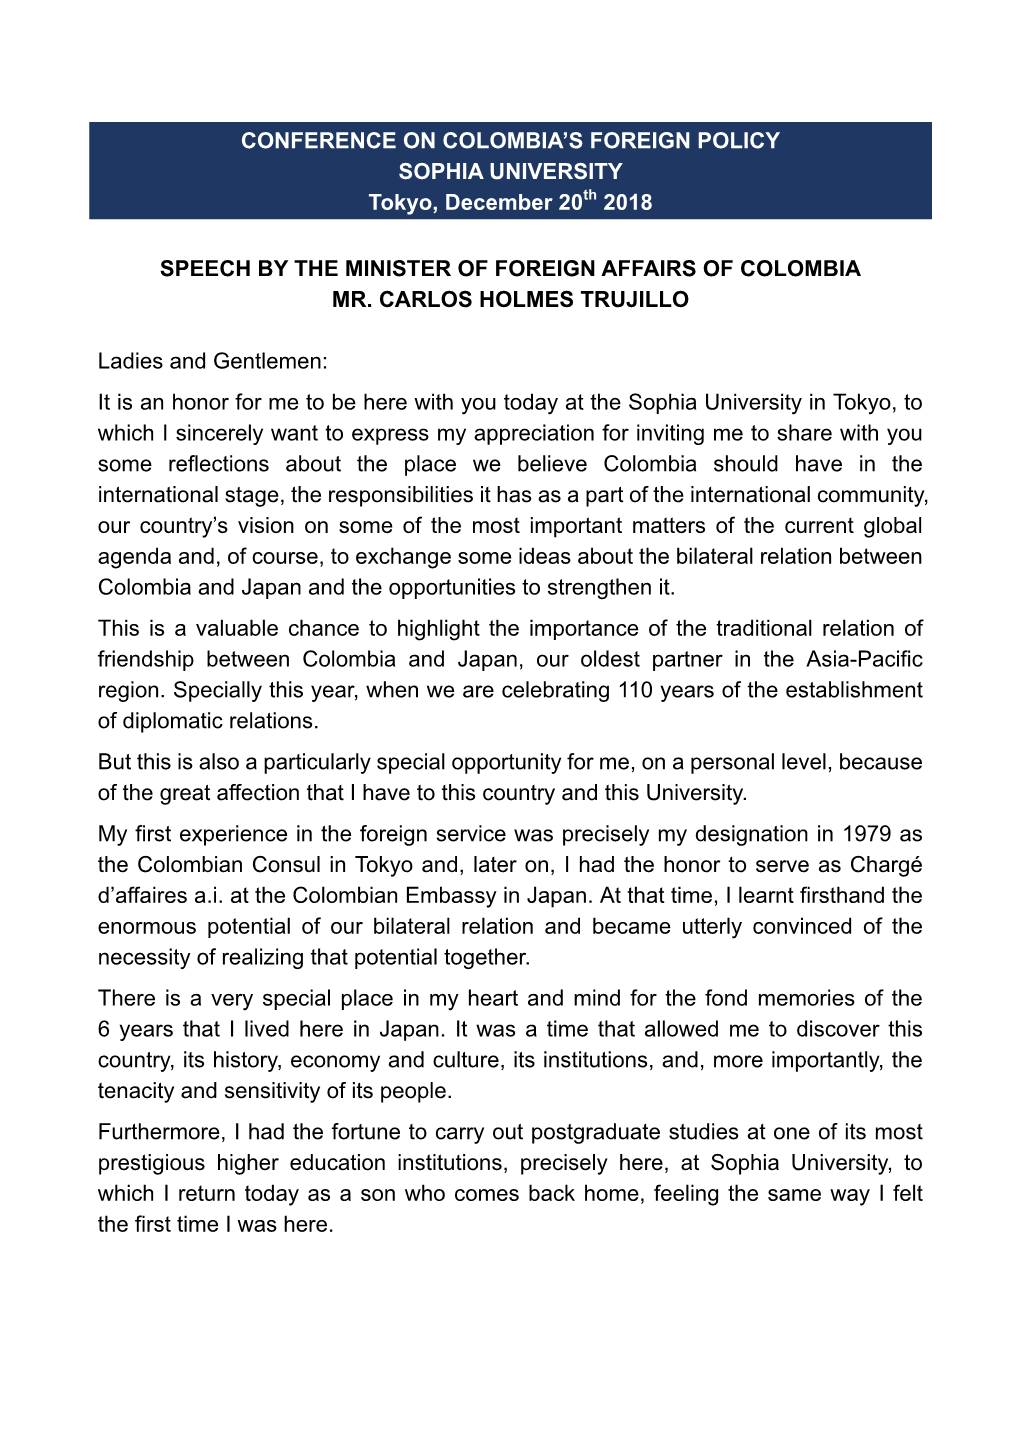 Conference on Colombia's Foreign Policy Sophia